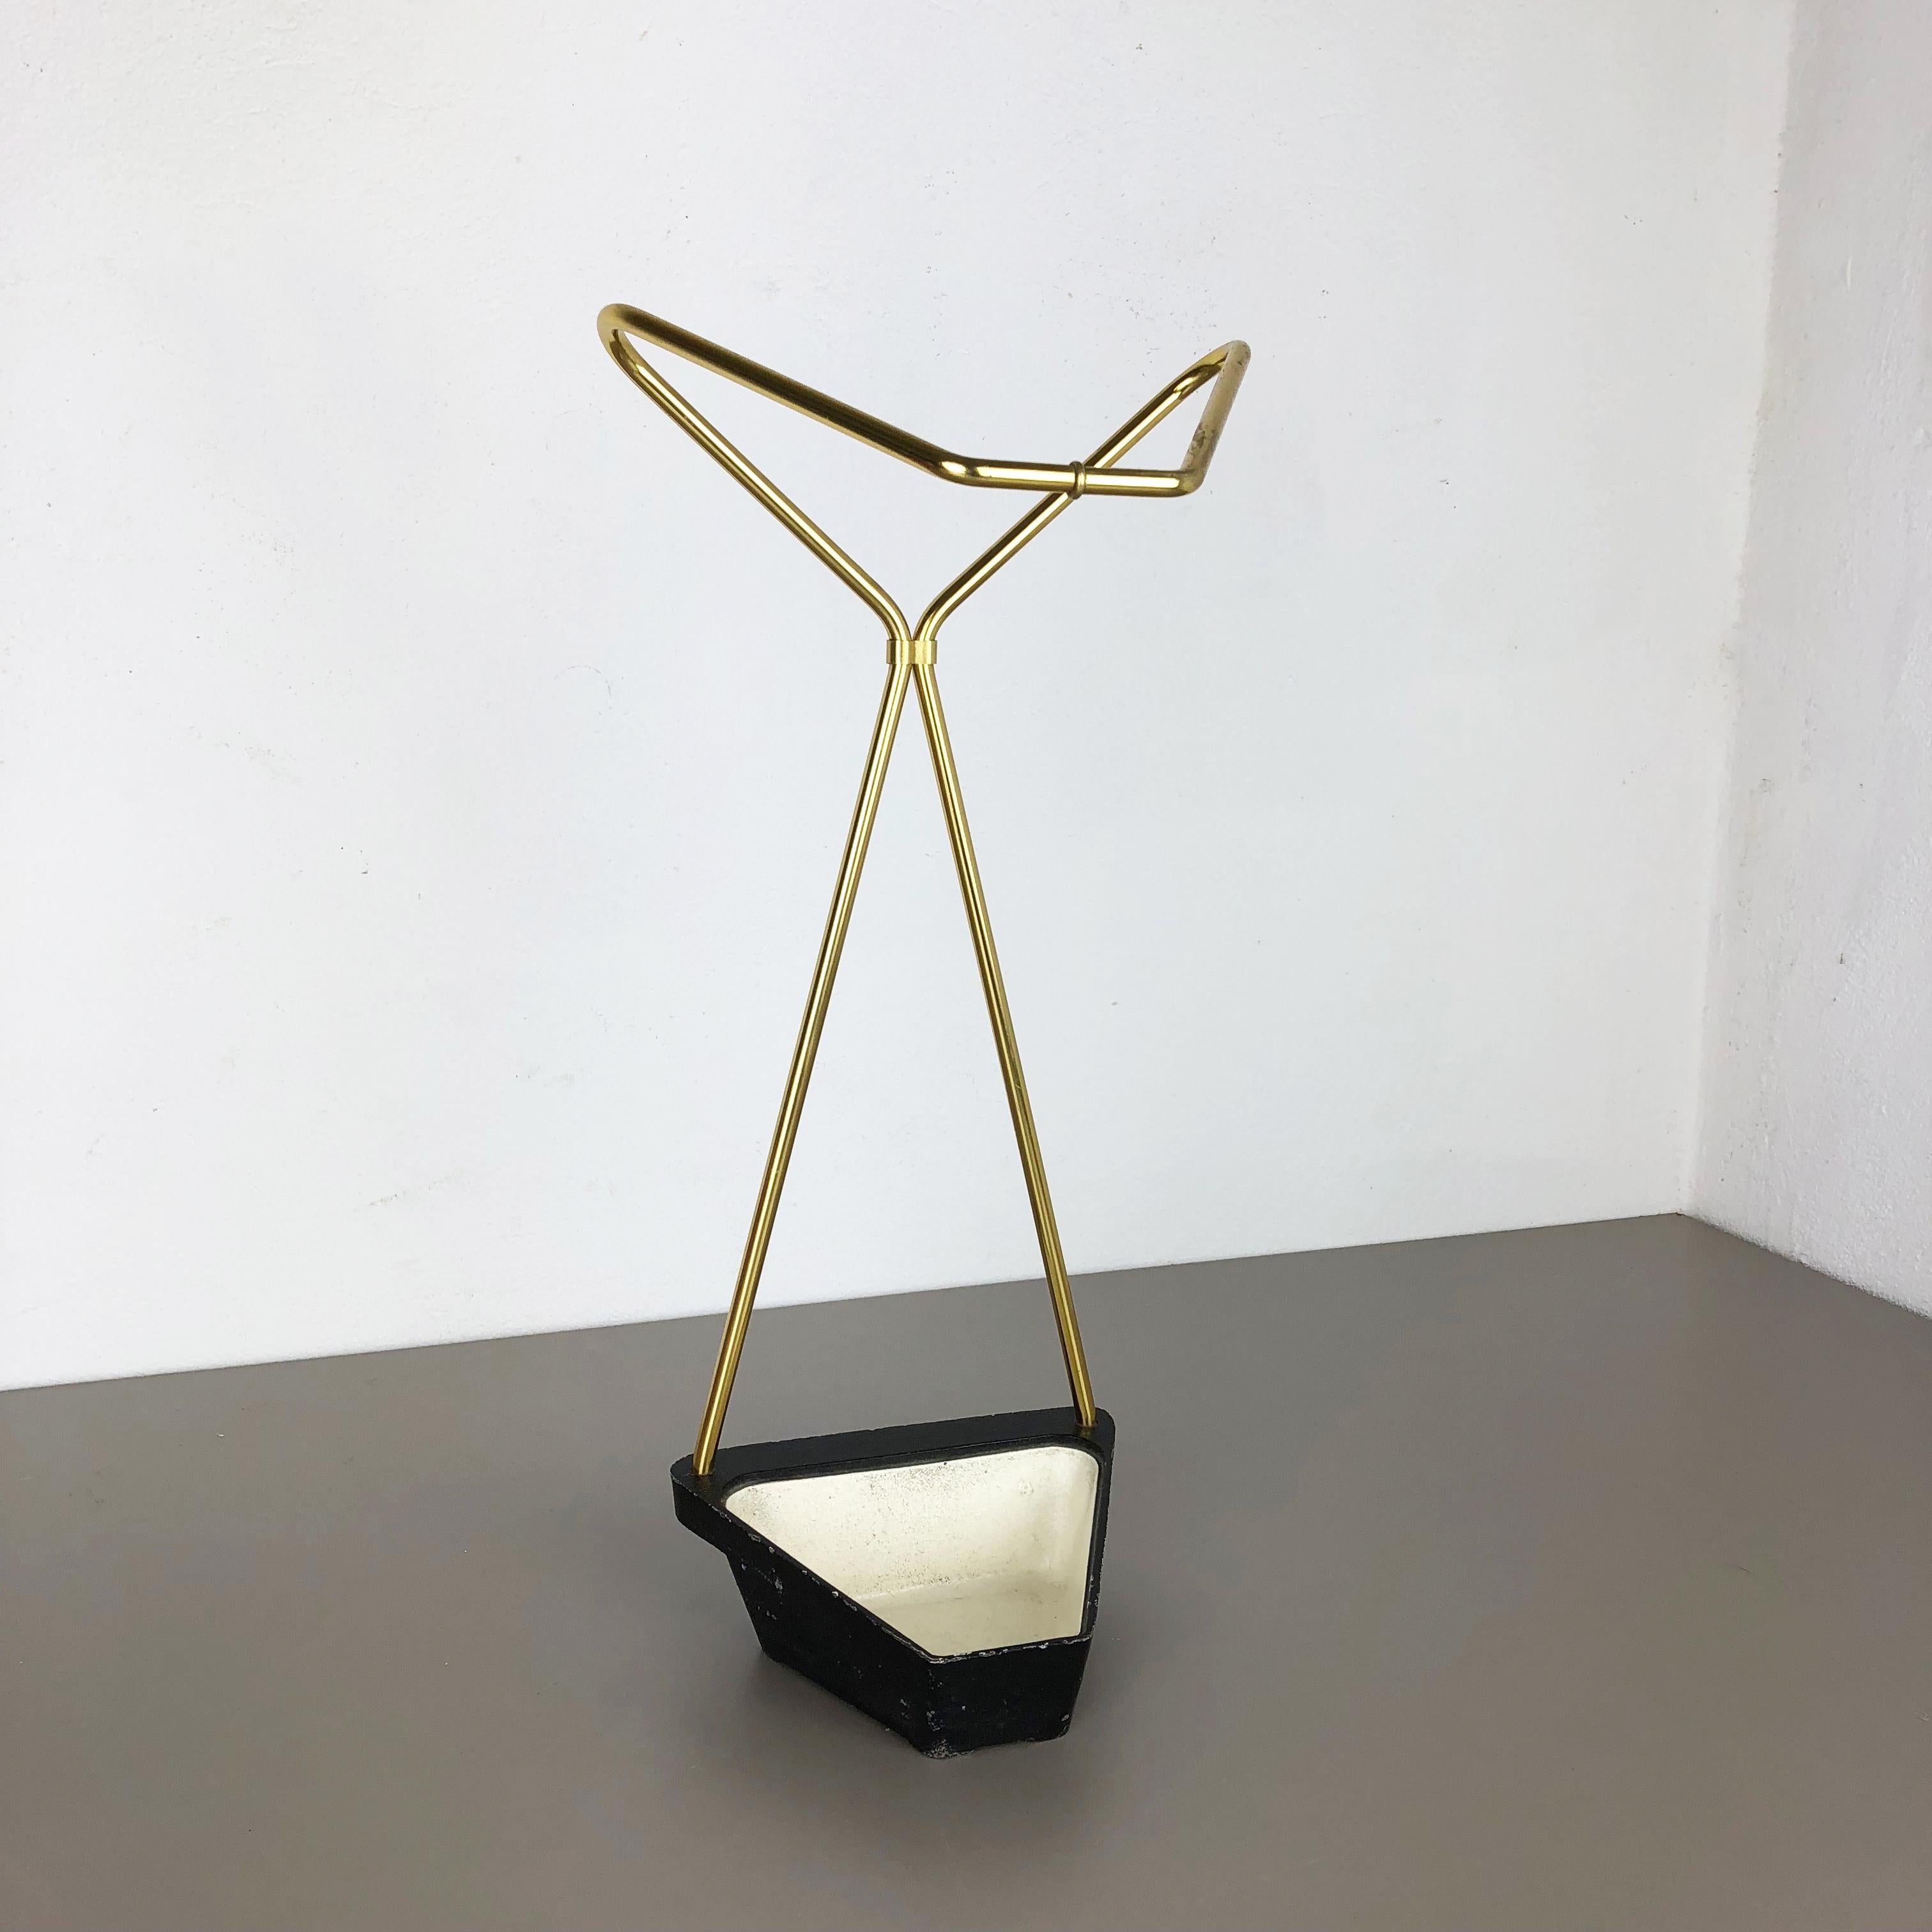 Article:

Bauhaus umbrella stand


Origin:

Germany


Age:

1950s


This original vintage Bauhaus style umbrella stand was produced in the 1950s in Germany. The brass colored top elements is made of aluminium, the heavy metal base